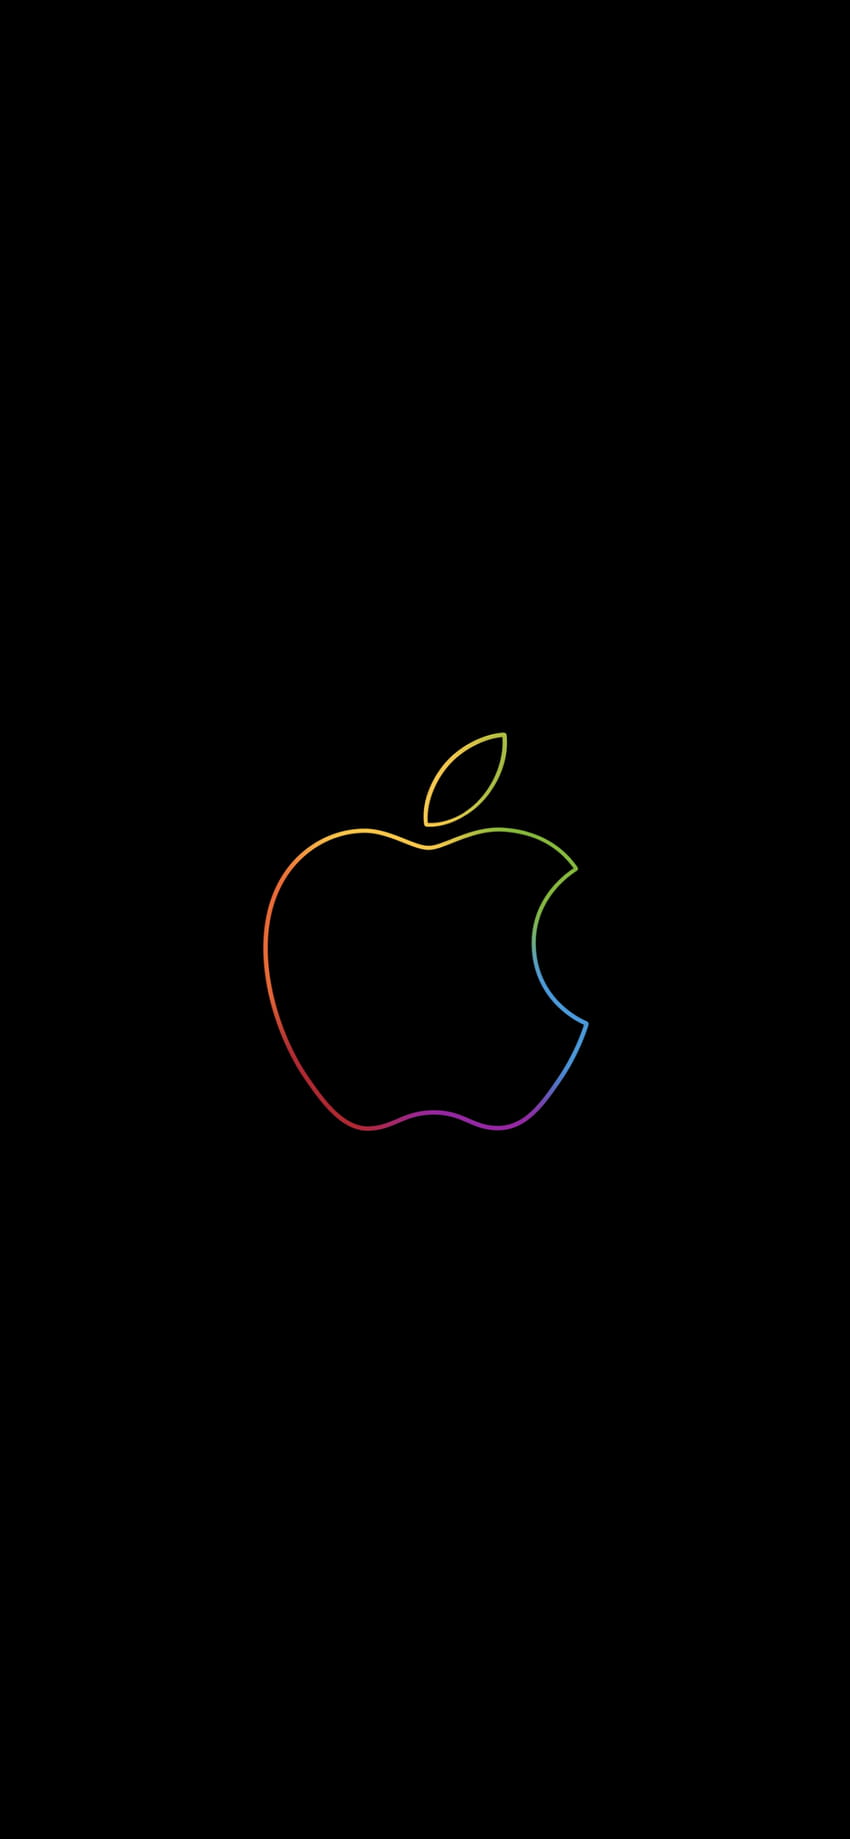 Apple logo , Colorful, Outline, Black background, iPad, , Technology, apple logo iphone 12 pro max HD phone wallpaper